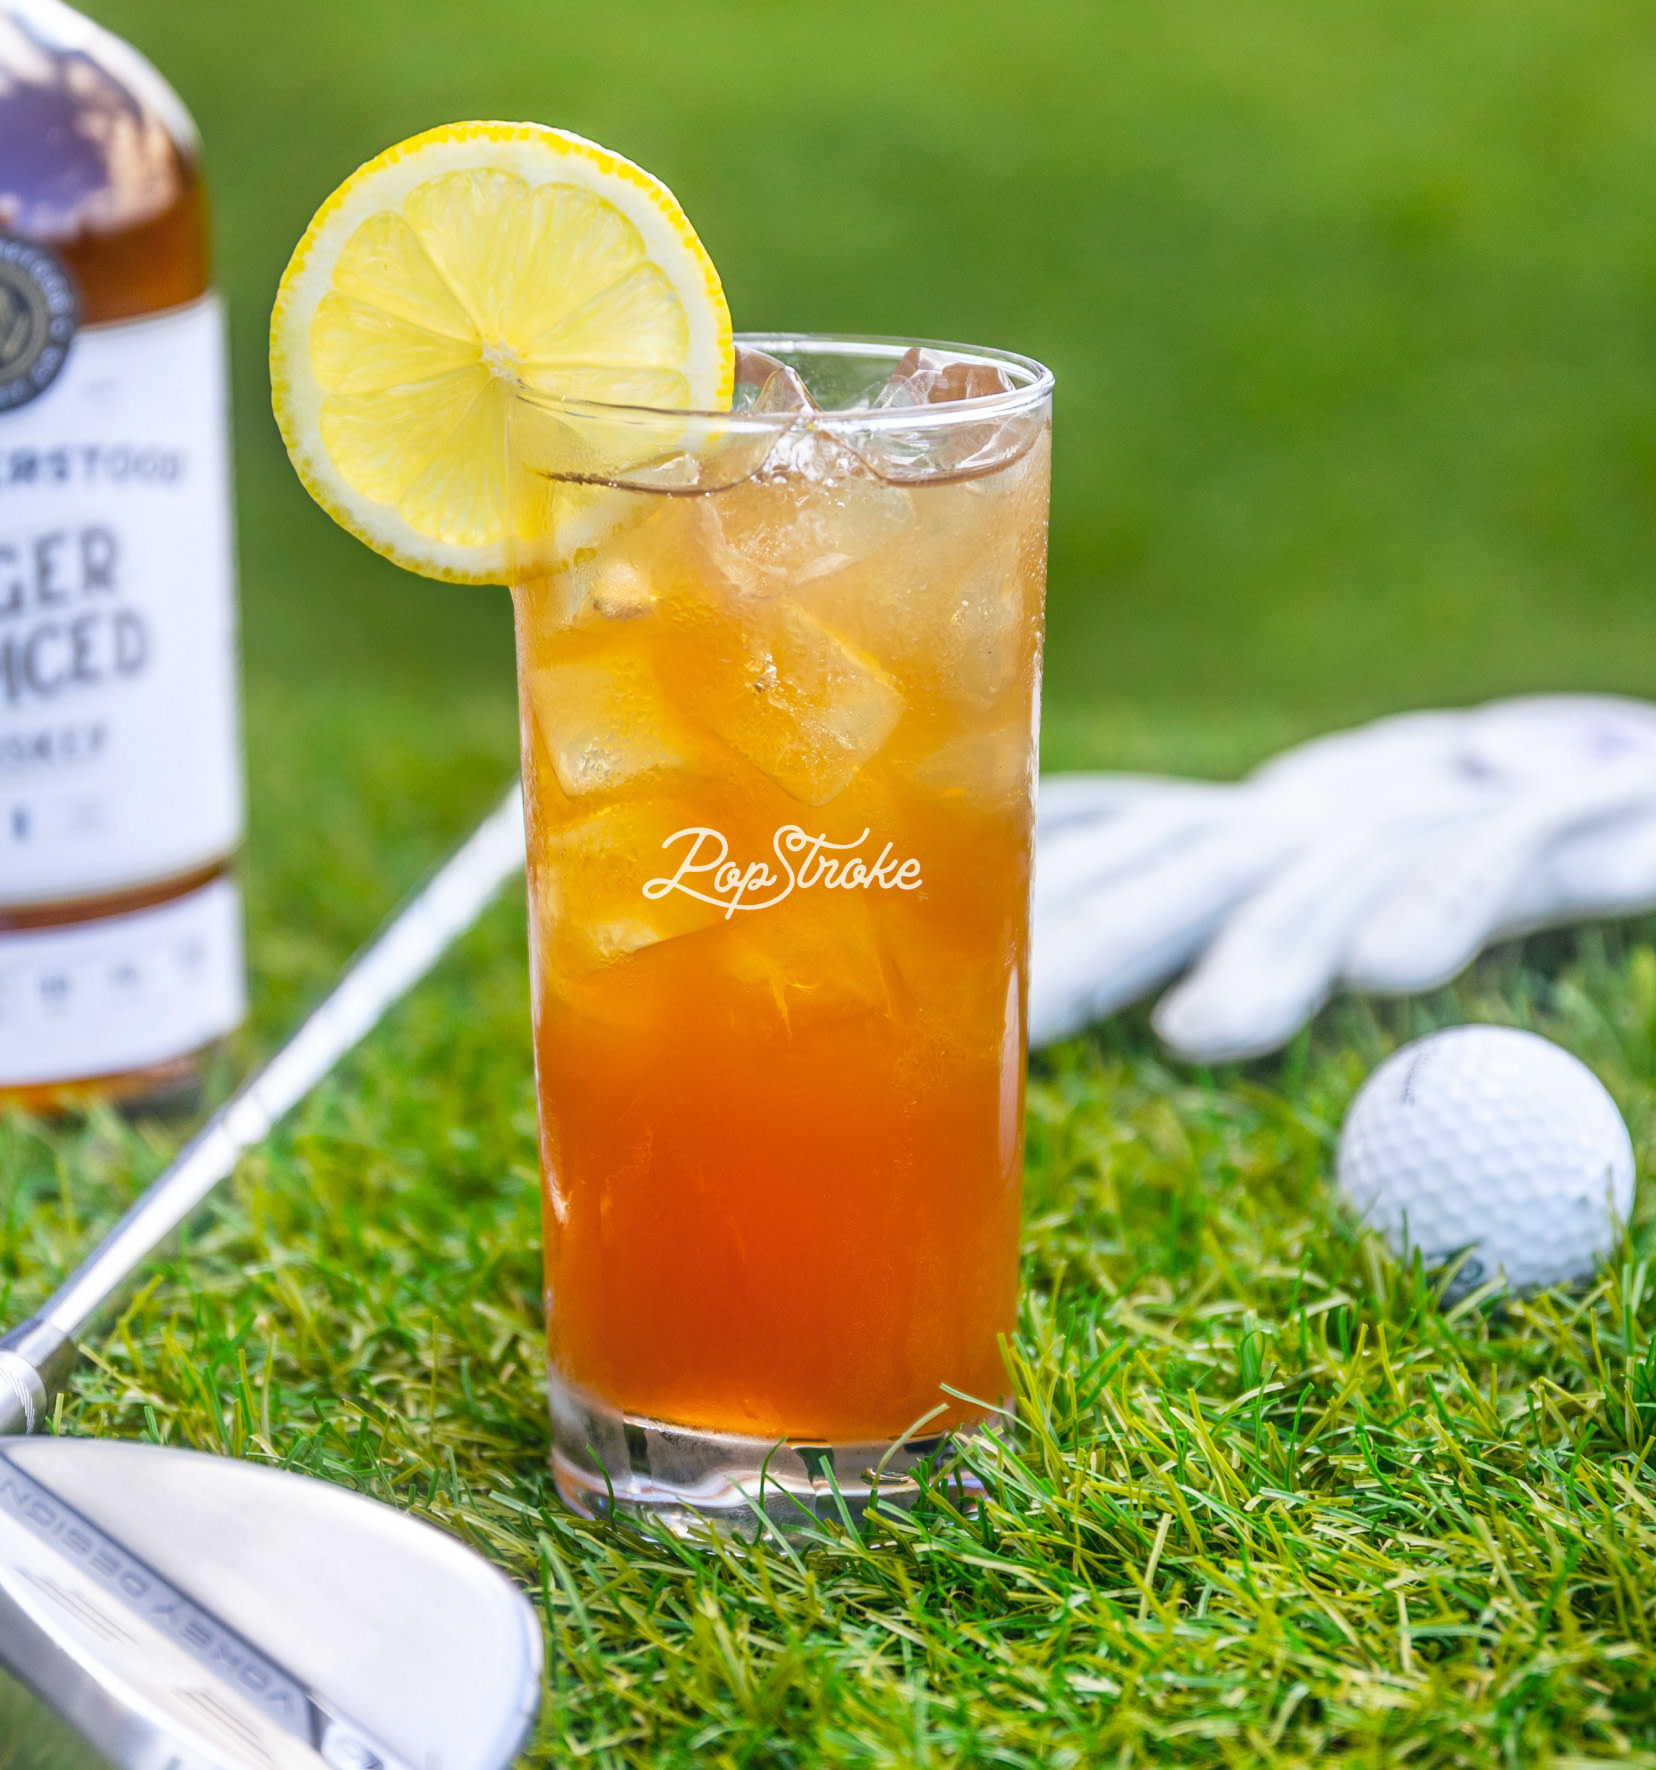 A glass holding an iced tea cocktail with a lemon slice in front of a golf club, set against a backdrop of green grass and a golf ball.